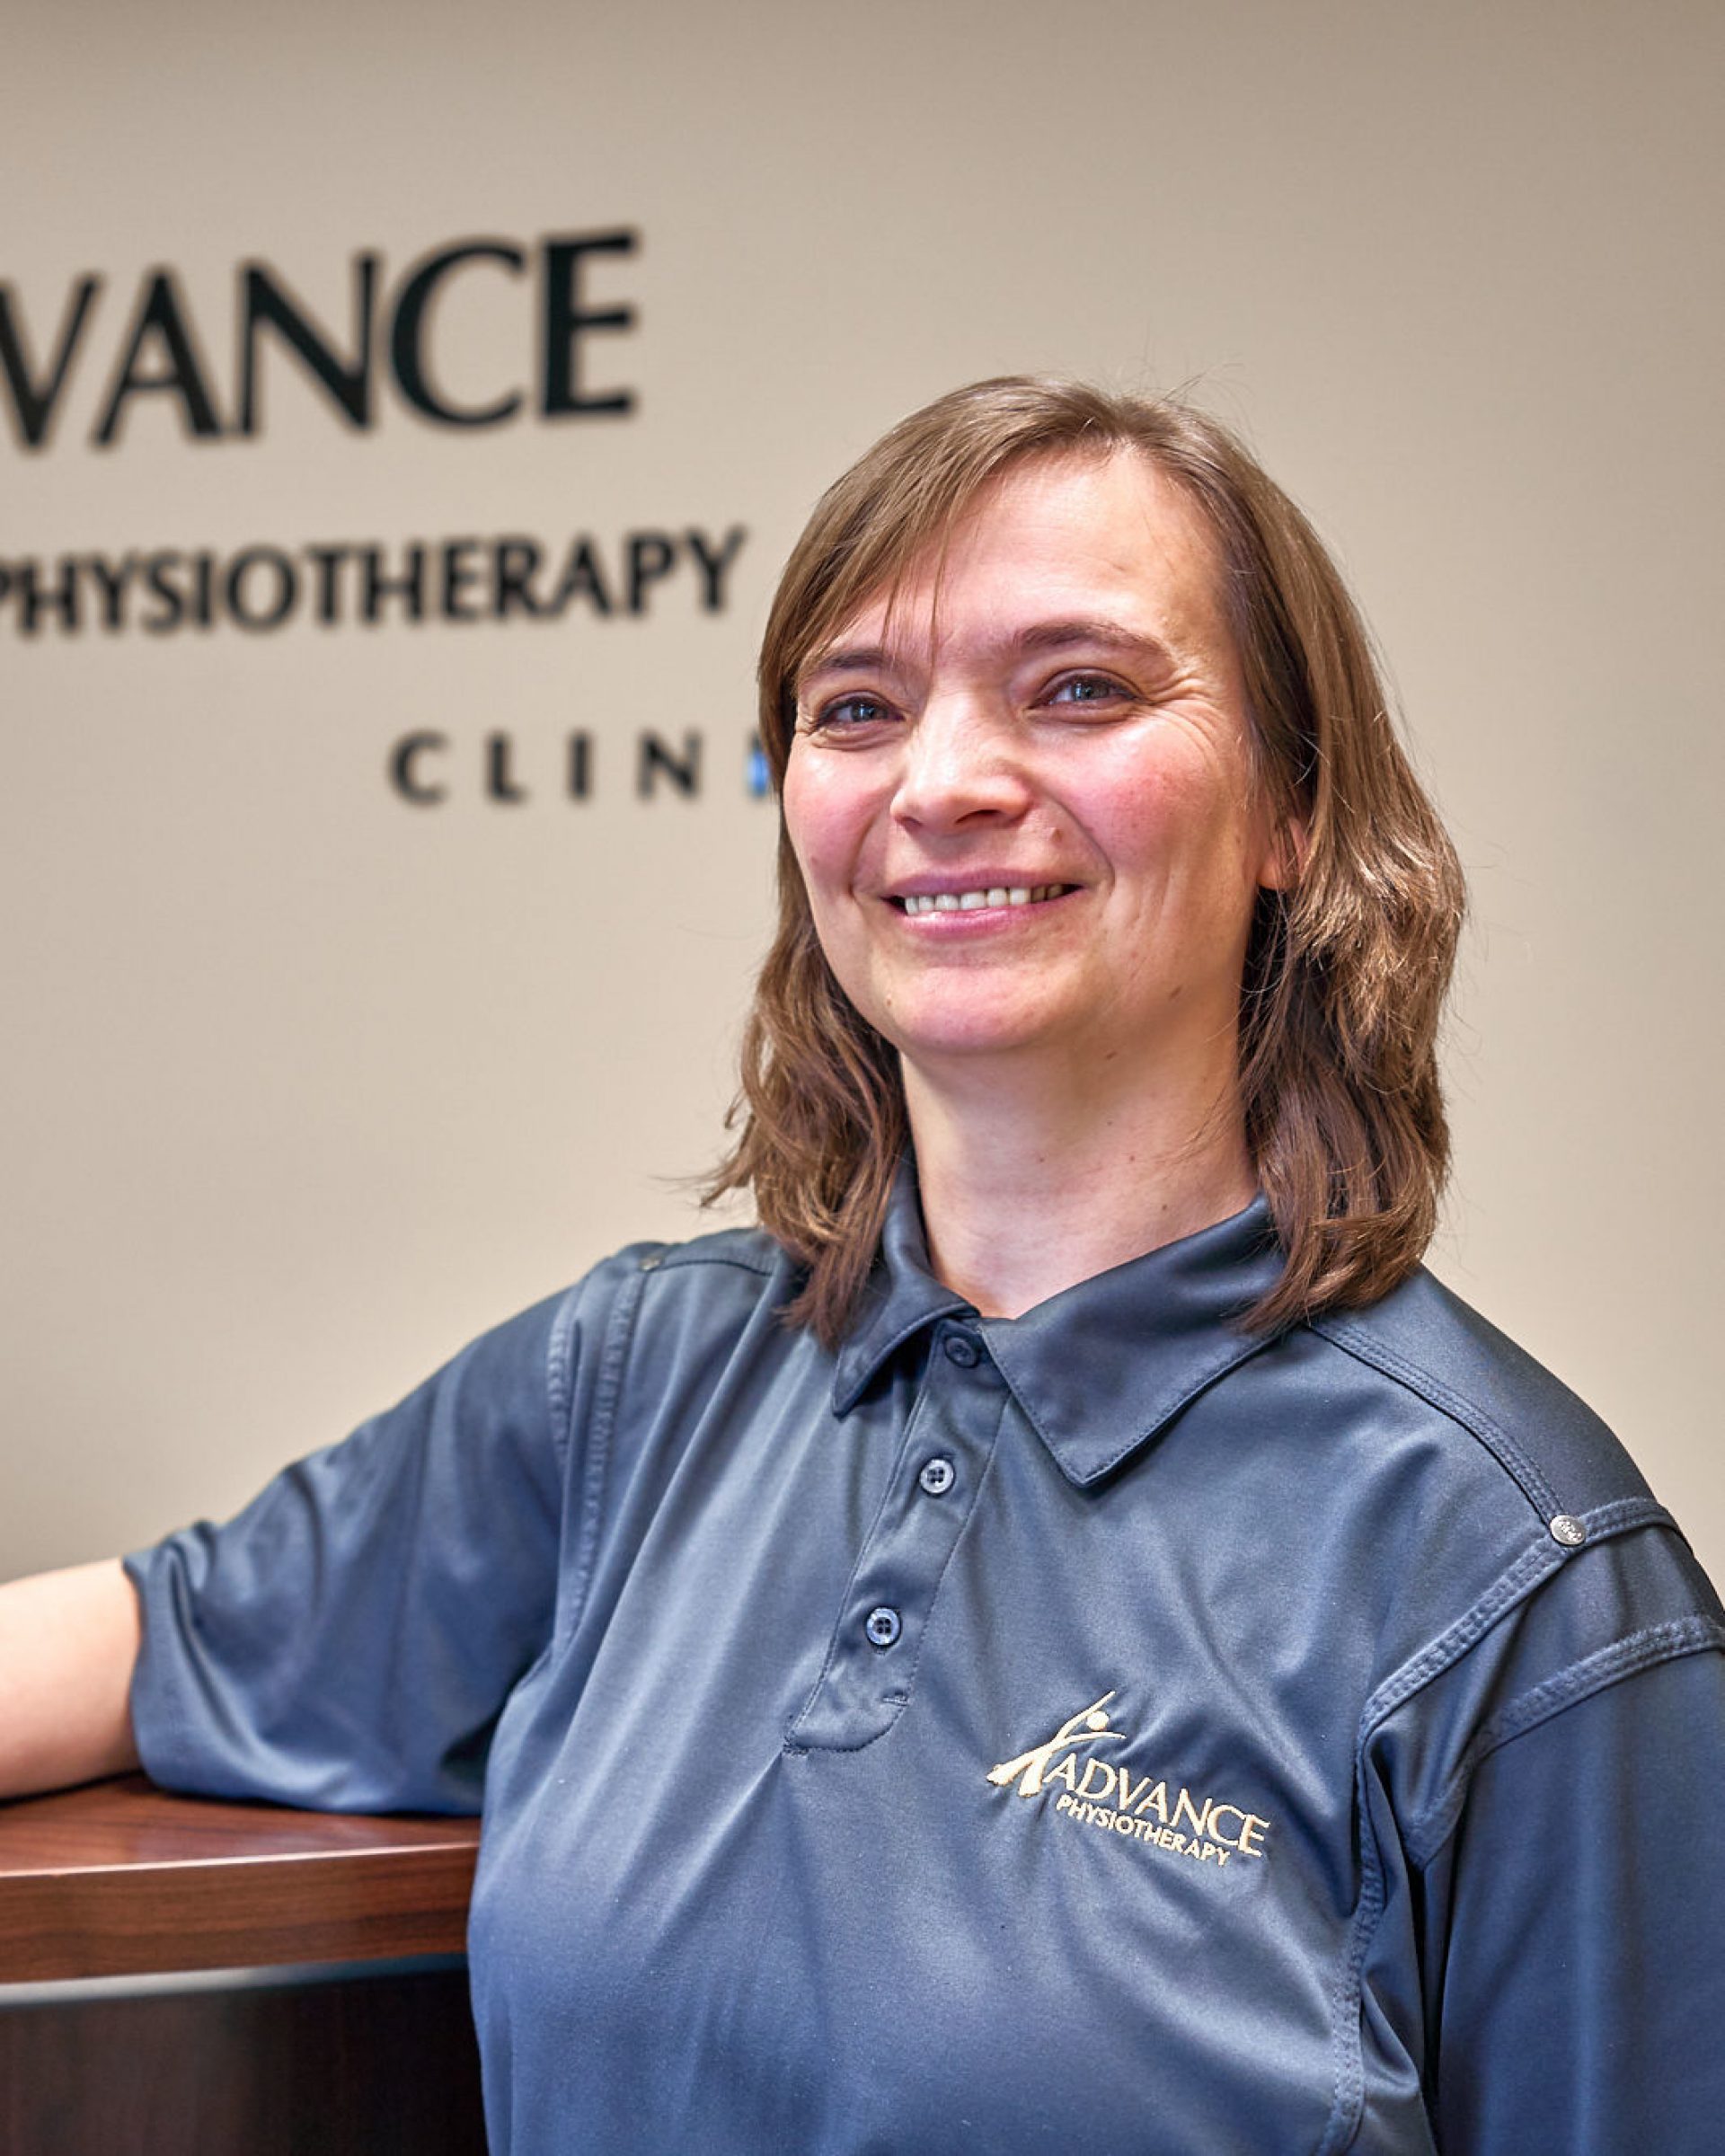 A headshot of one of the staff at Advance Physio